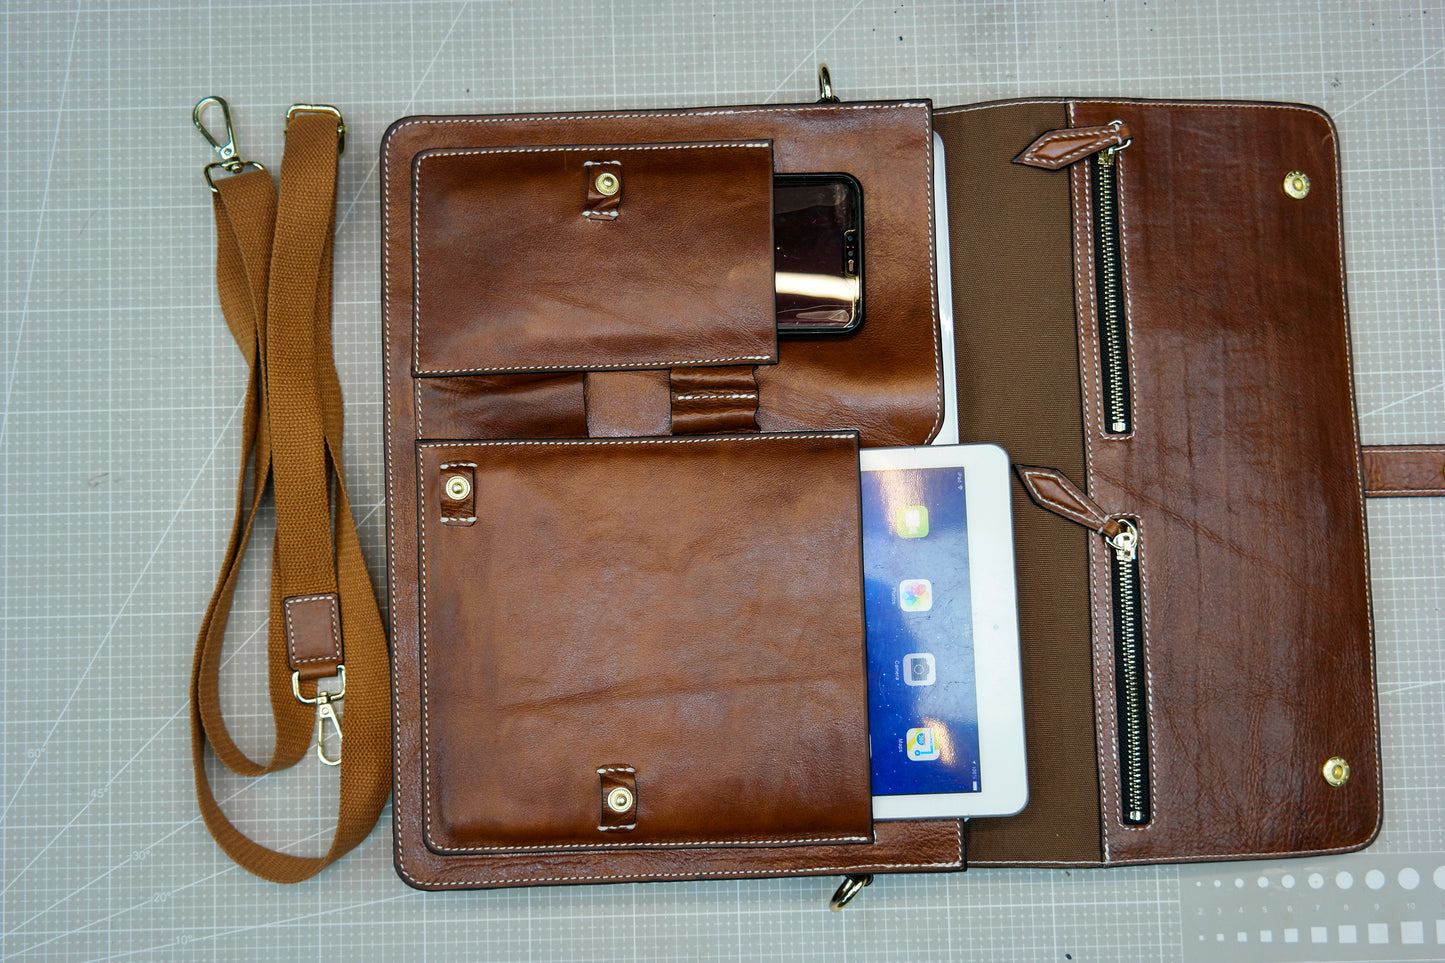 Messenger bag and office bag made of cowhide,Briefcase, laptop bag